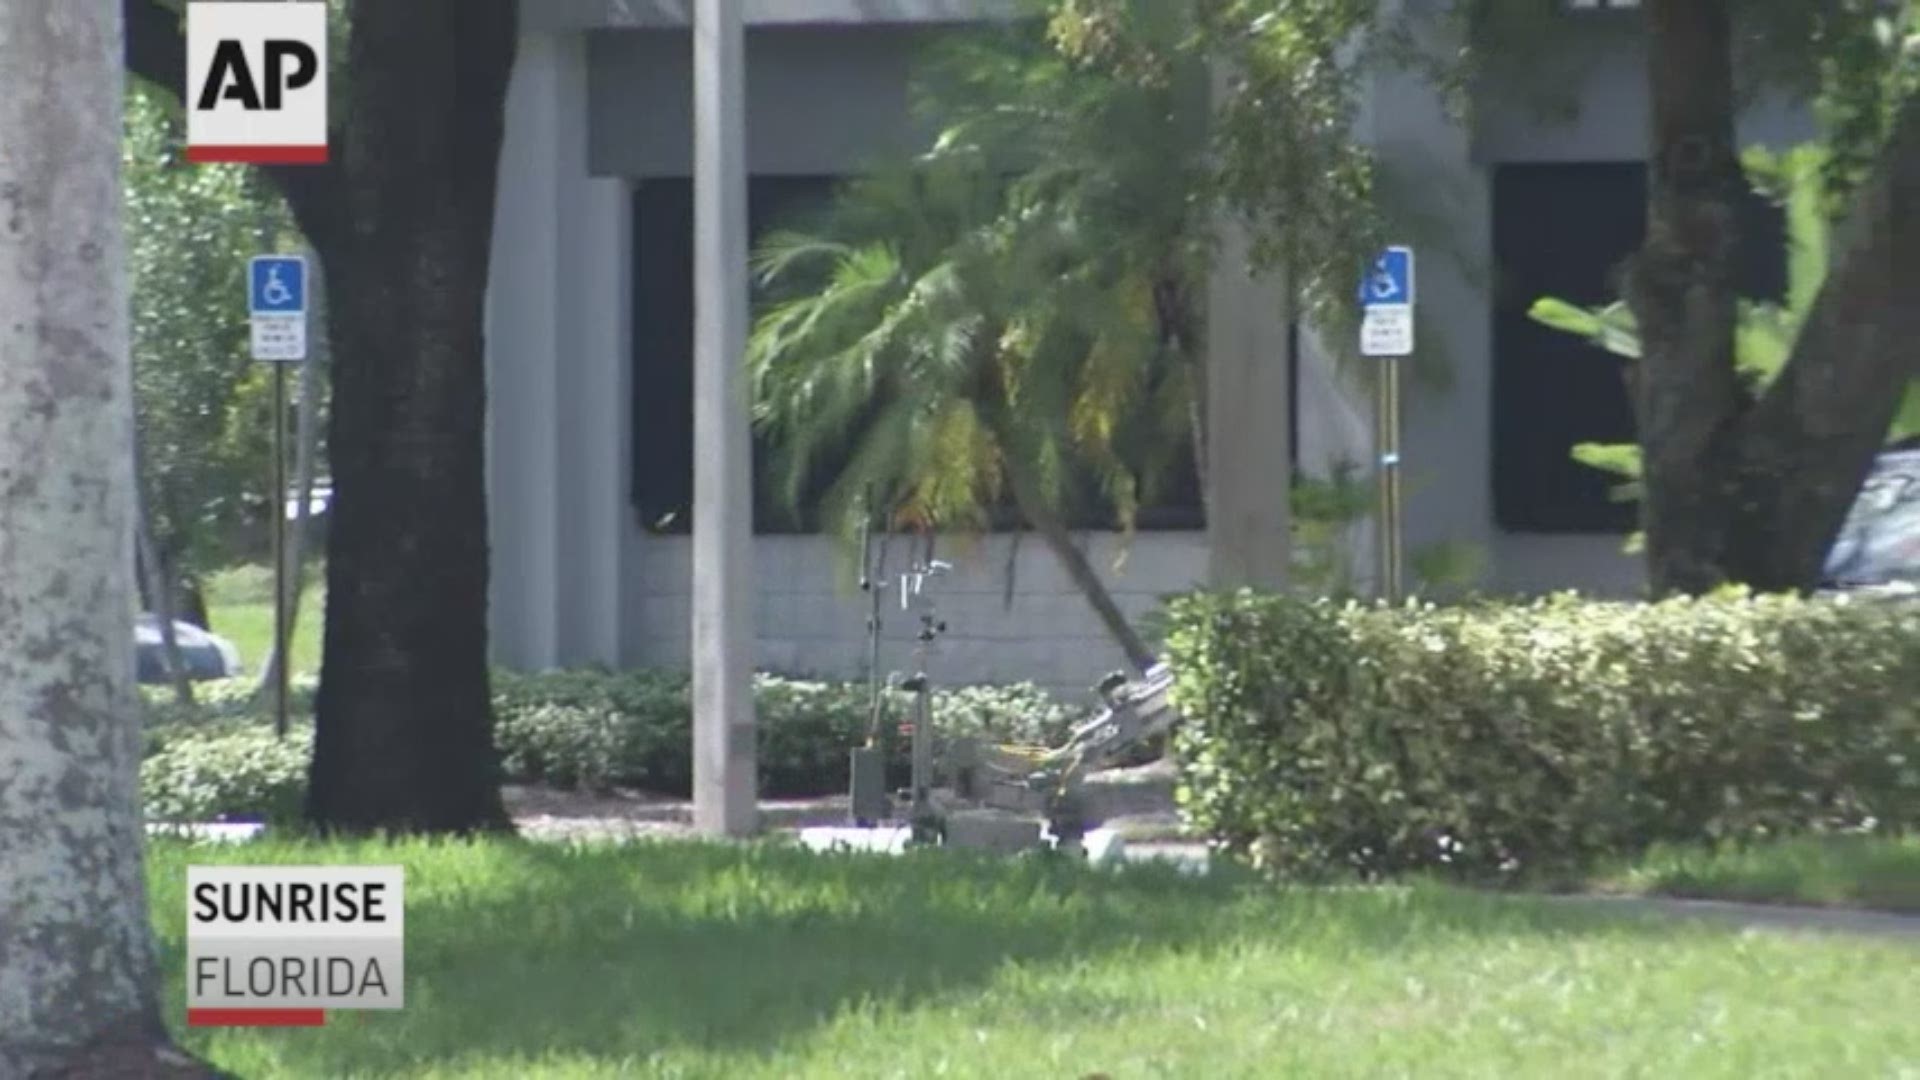 A bomb squad responded to a suspicious package sent to the office of Rep. Debbie Wasserman Schultz in Florida. The package is believed to be part of crude pipe bombs aimed at prominent Democrats, including former President Barack Obama (AP)